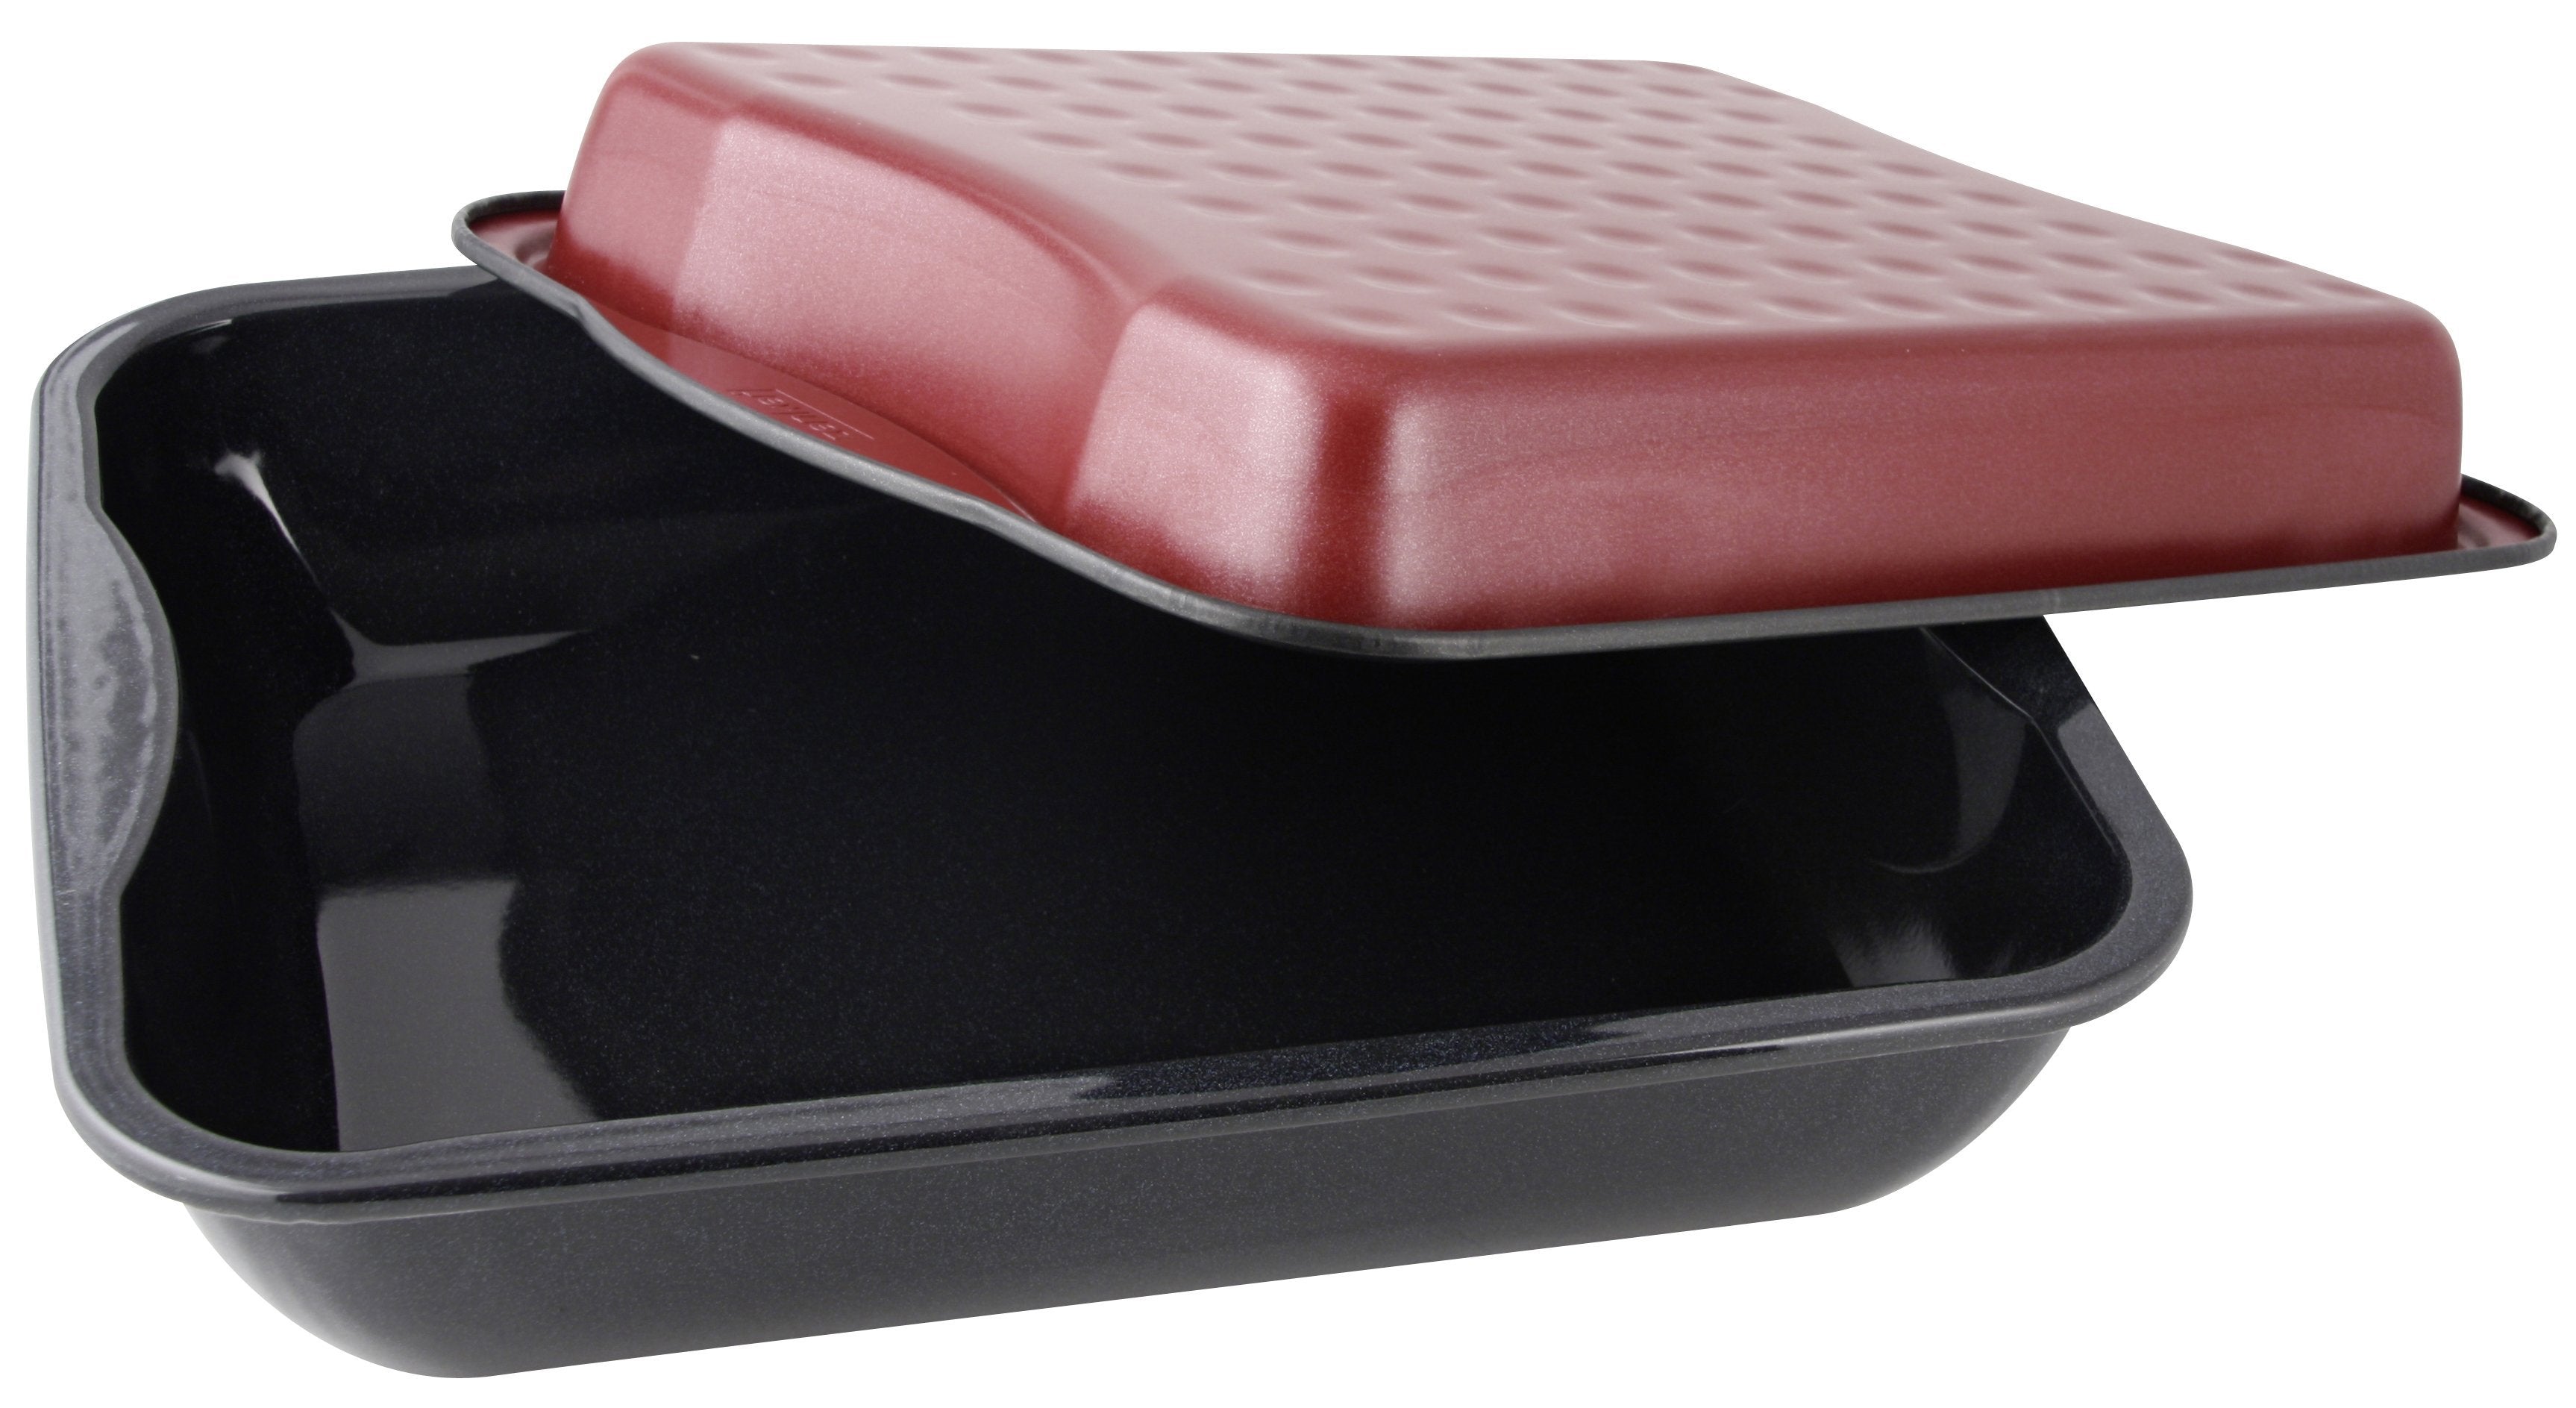 Zenker "Special Cooking" Grill Pan And Roasting Dish With Cover, Black/Red 40X34X14 Cm - Whole and All